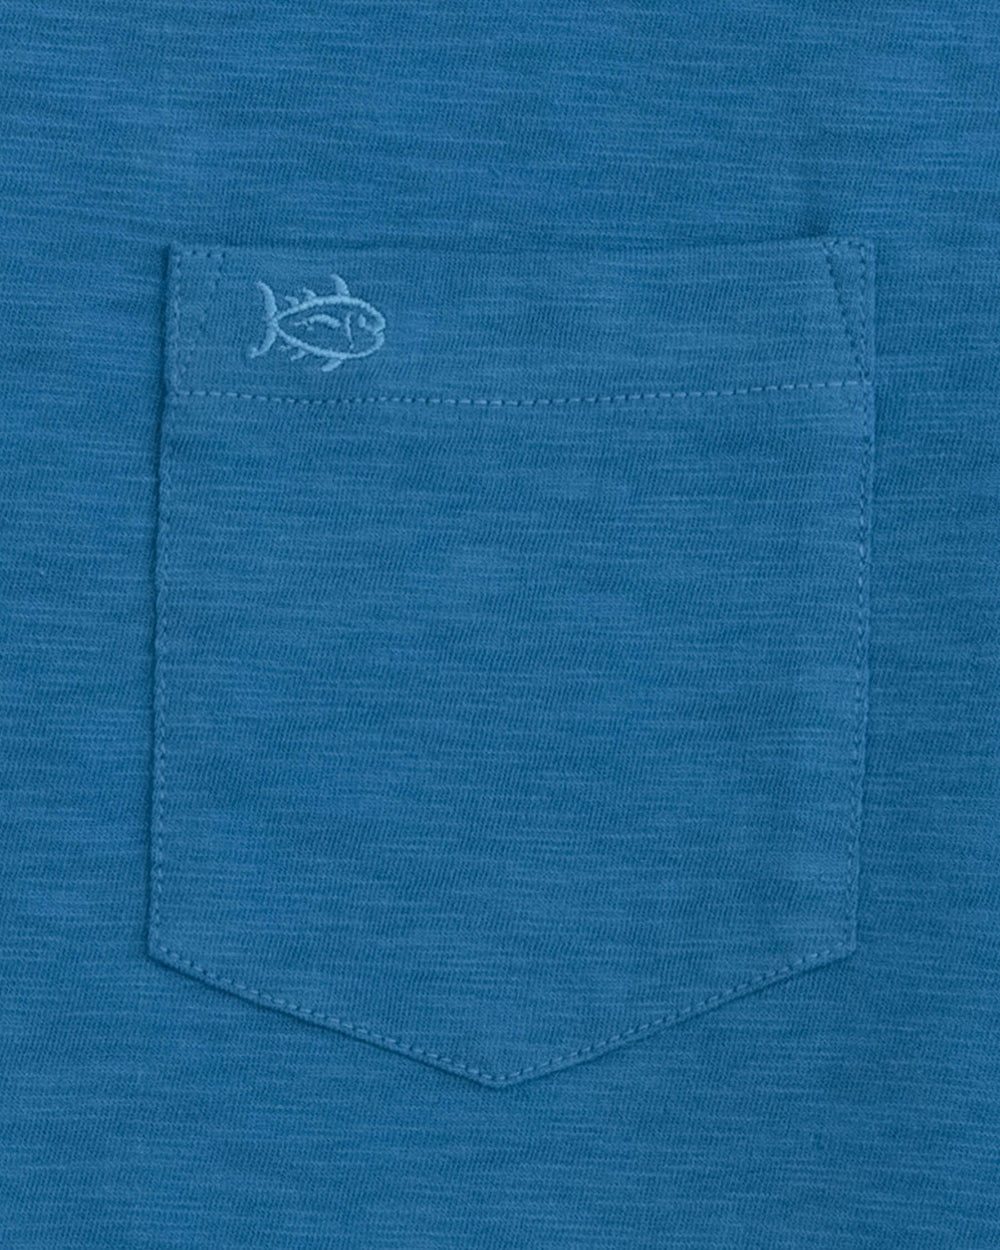 The detail view of the Southern Tide Sun Farer Short Sleeve T-Shirt by Southern Tide - Atlantic Blue